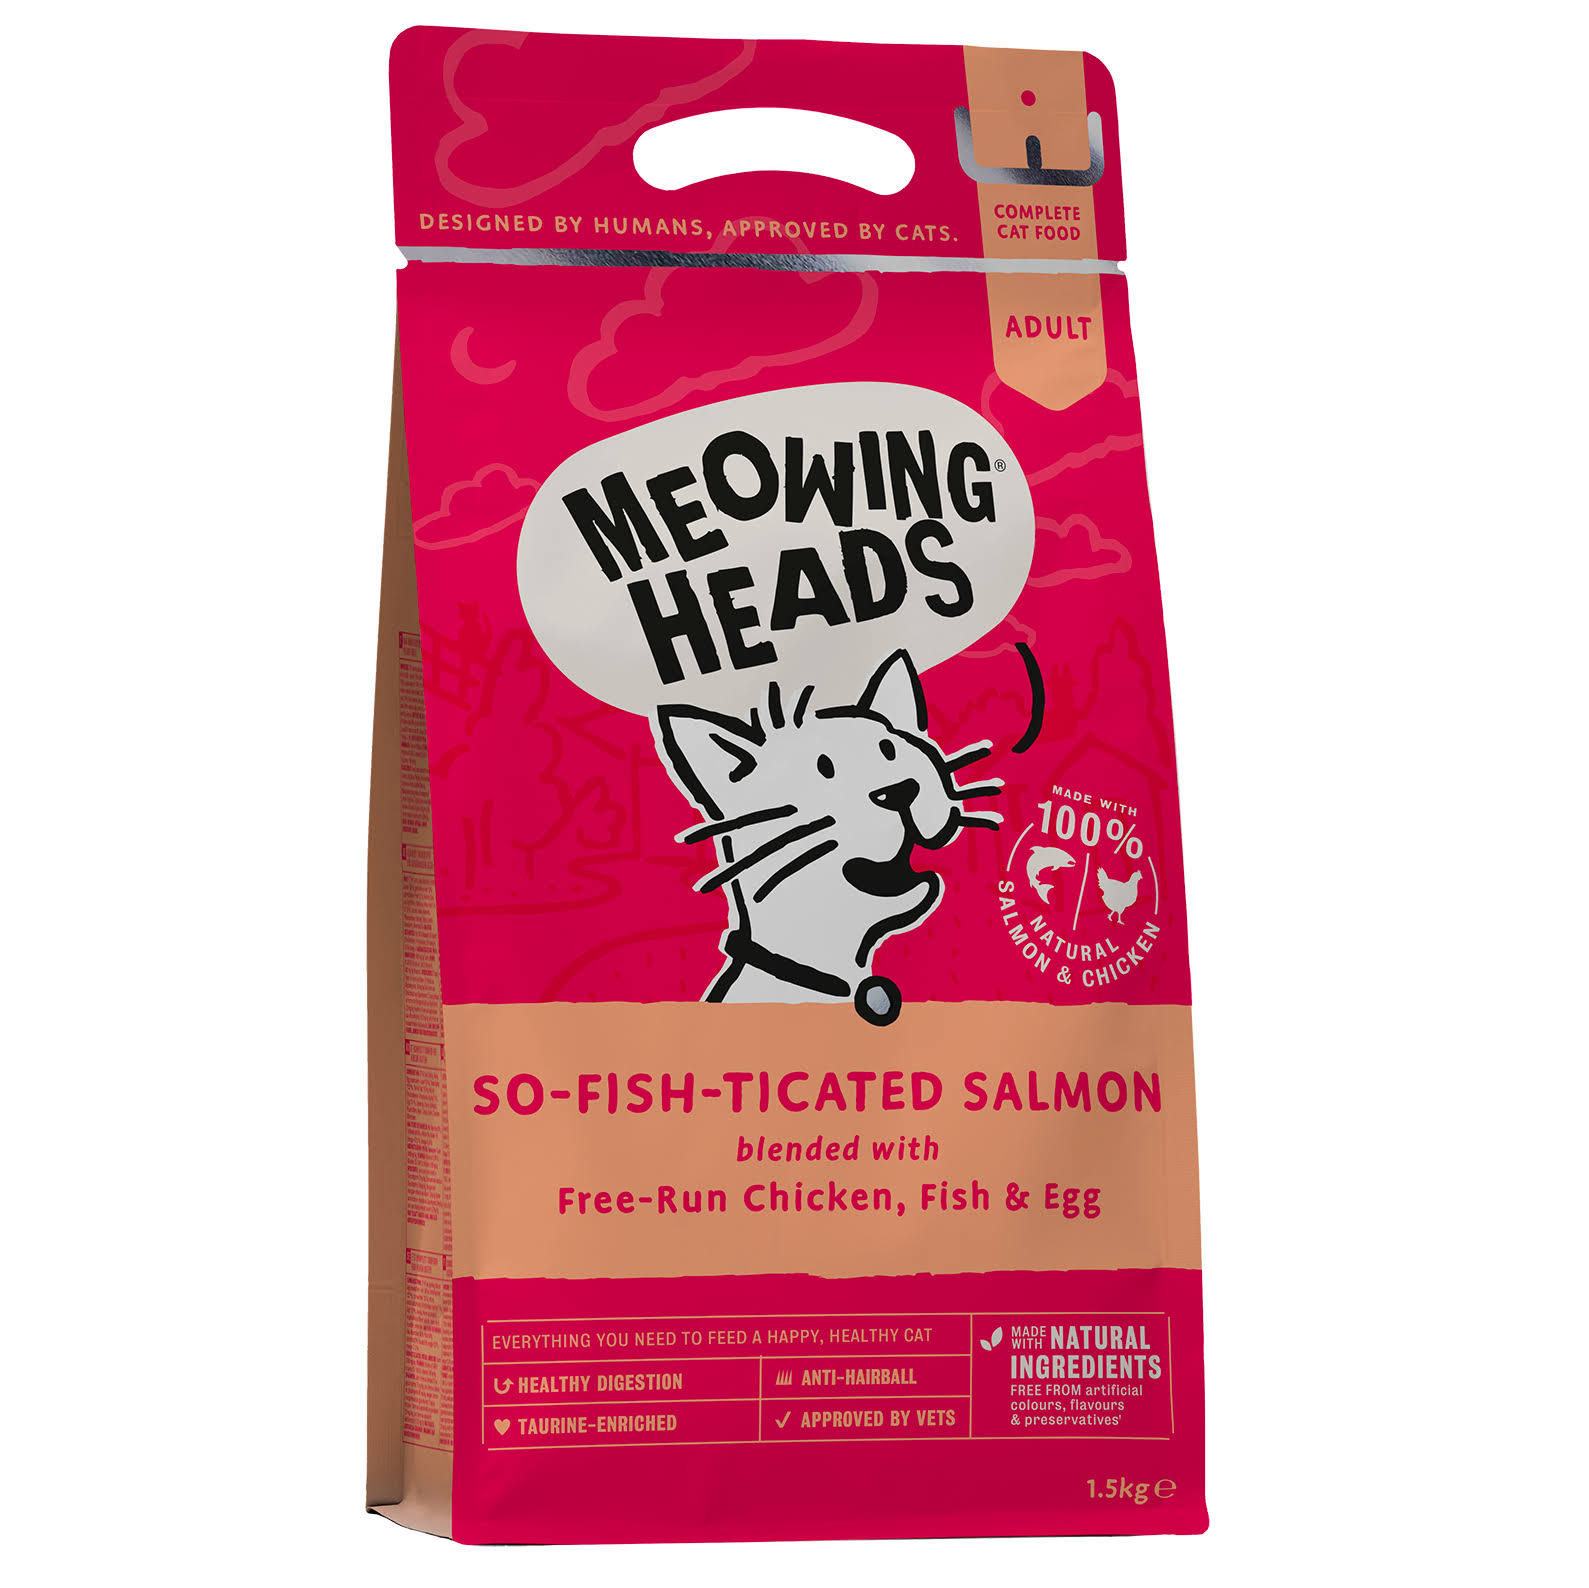 Meowing Heads So-Fish-Ticated Salmon 1.5kg